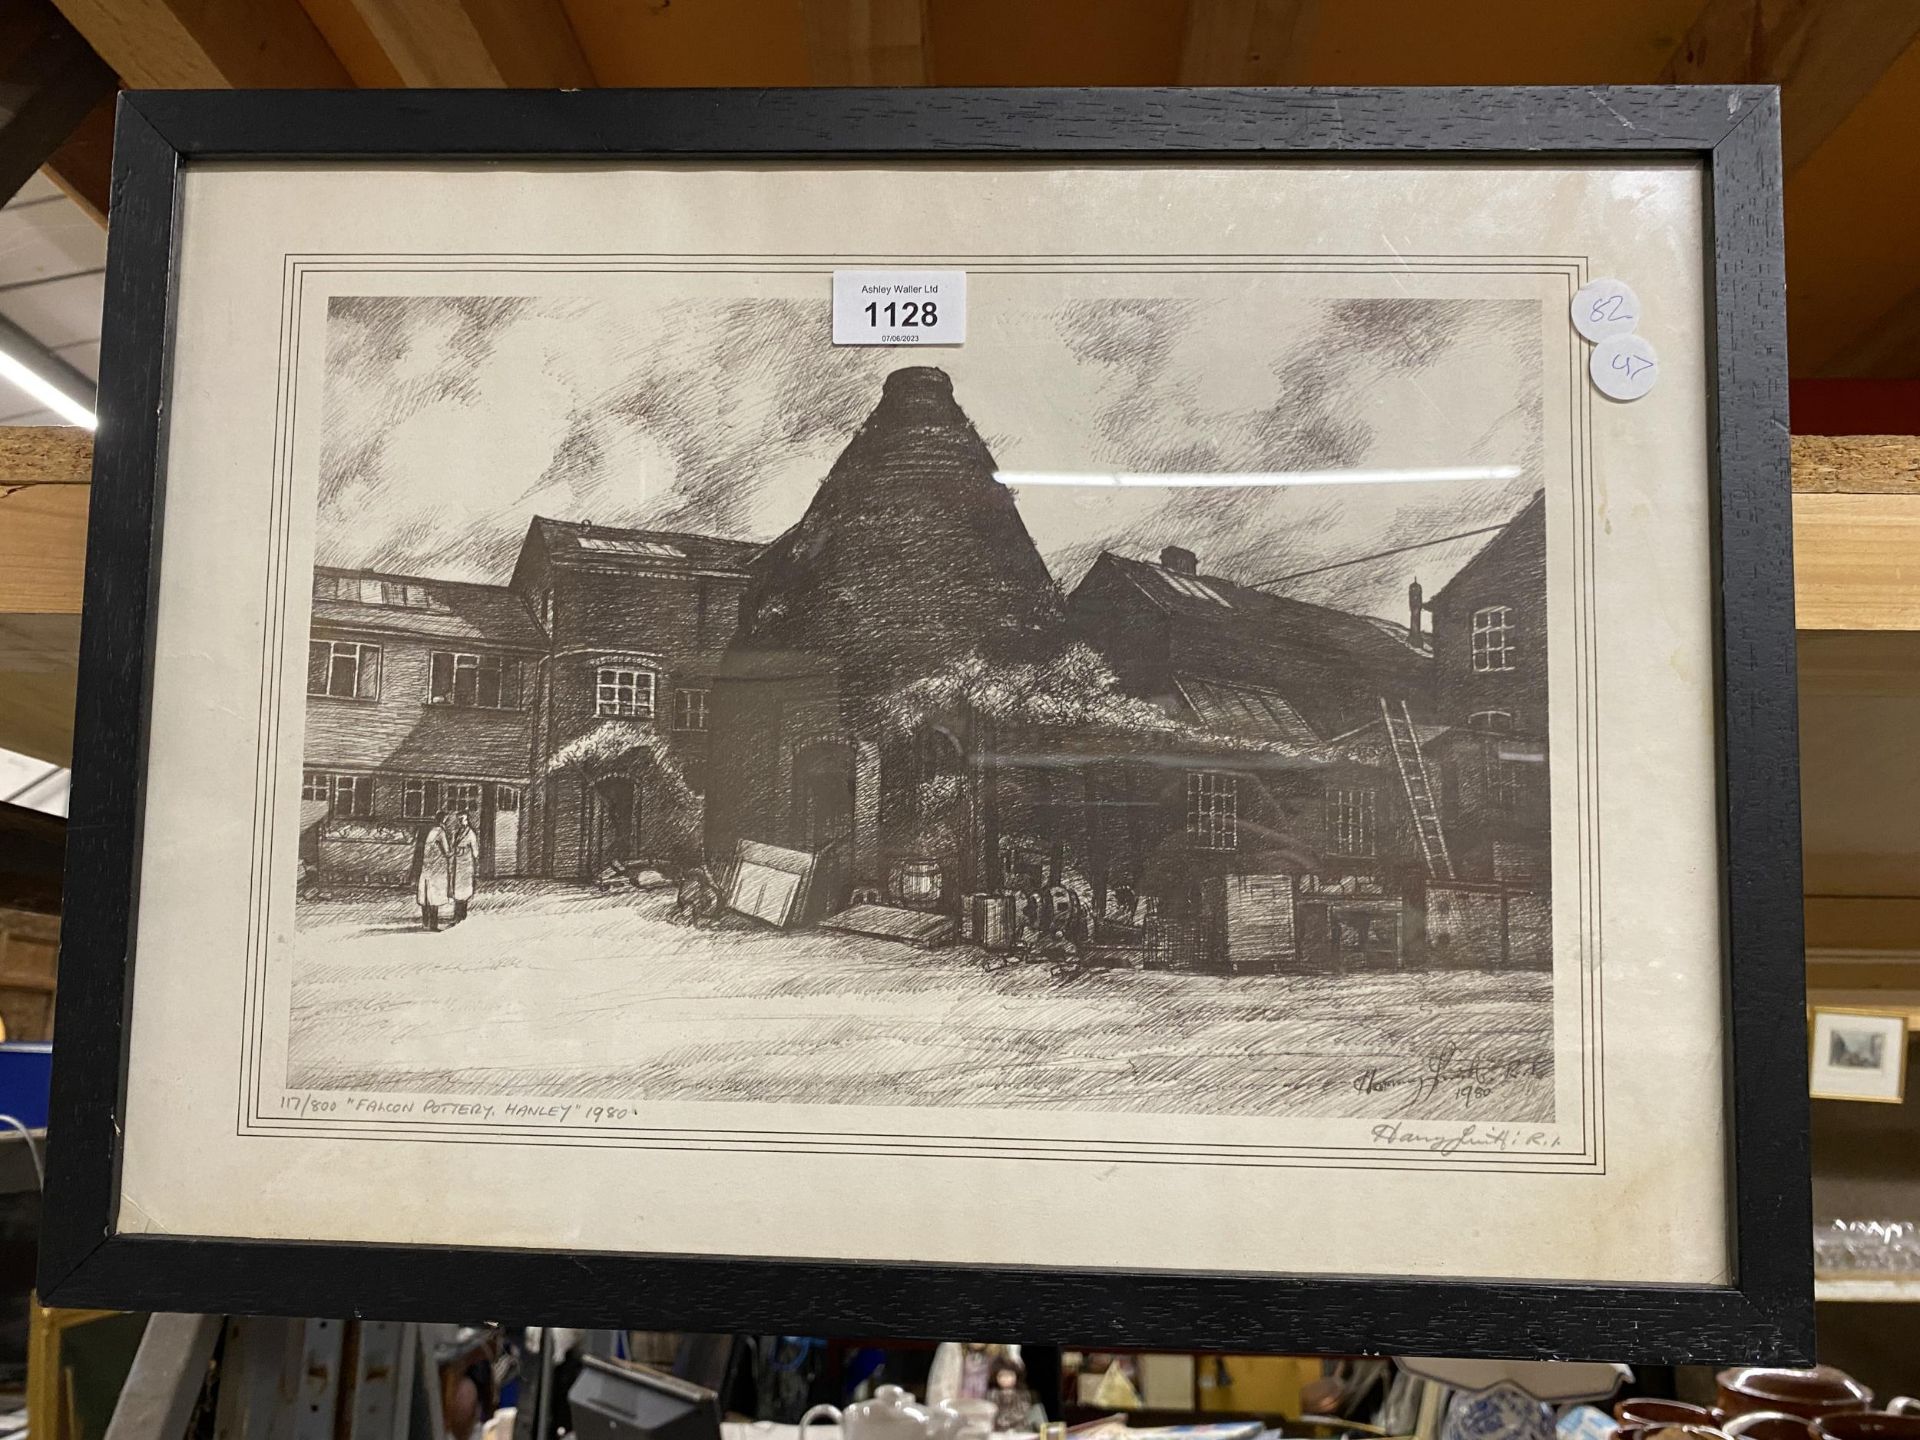 A FRAMED LIMITED EDITION SIGNED PRINT OF FALCON POTTERY, HANLEY BY HARRY SMITH RA